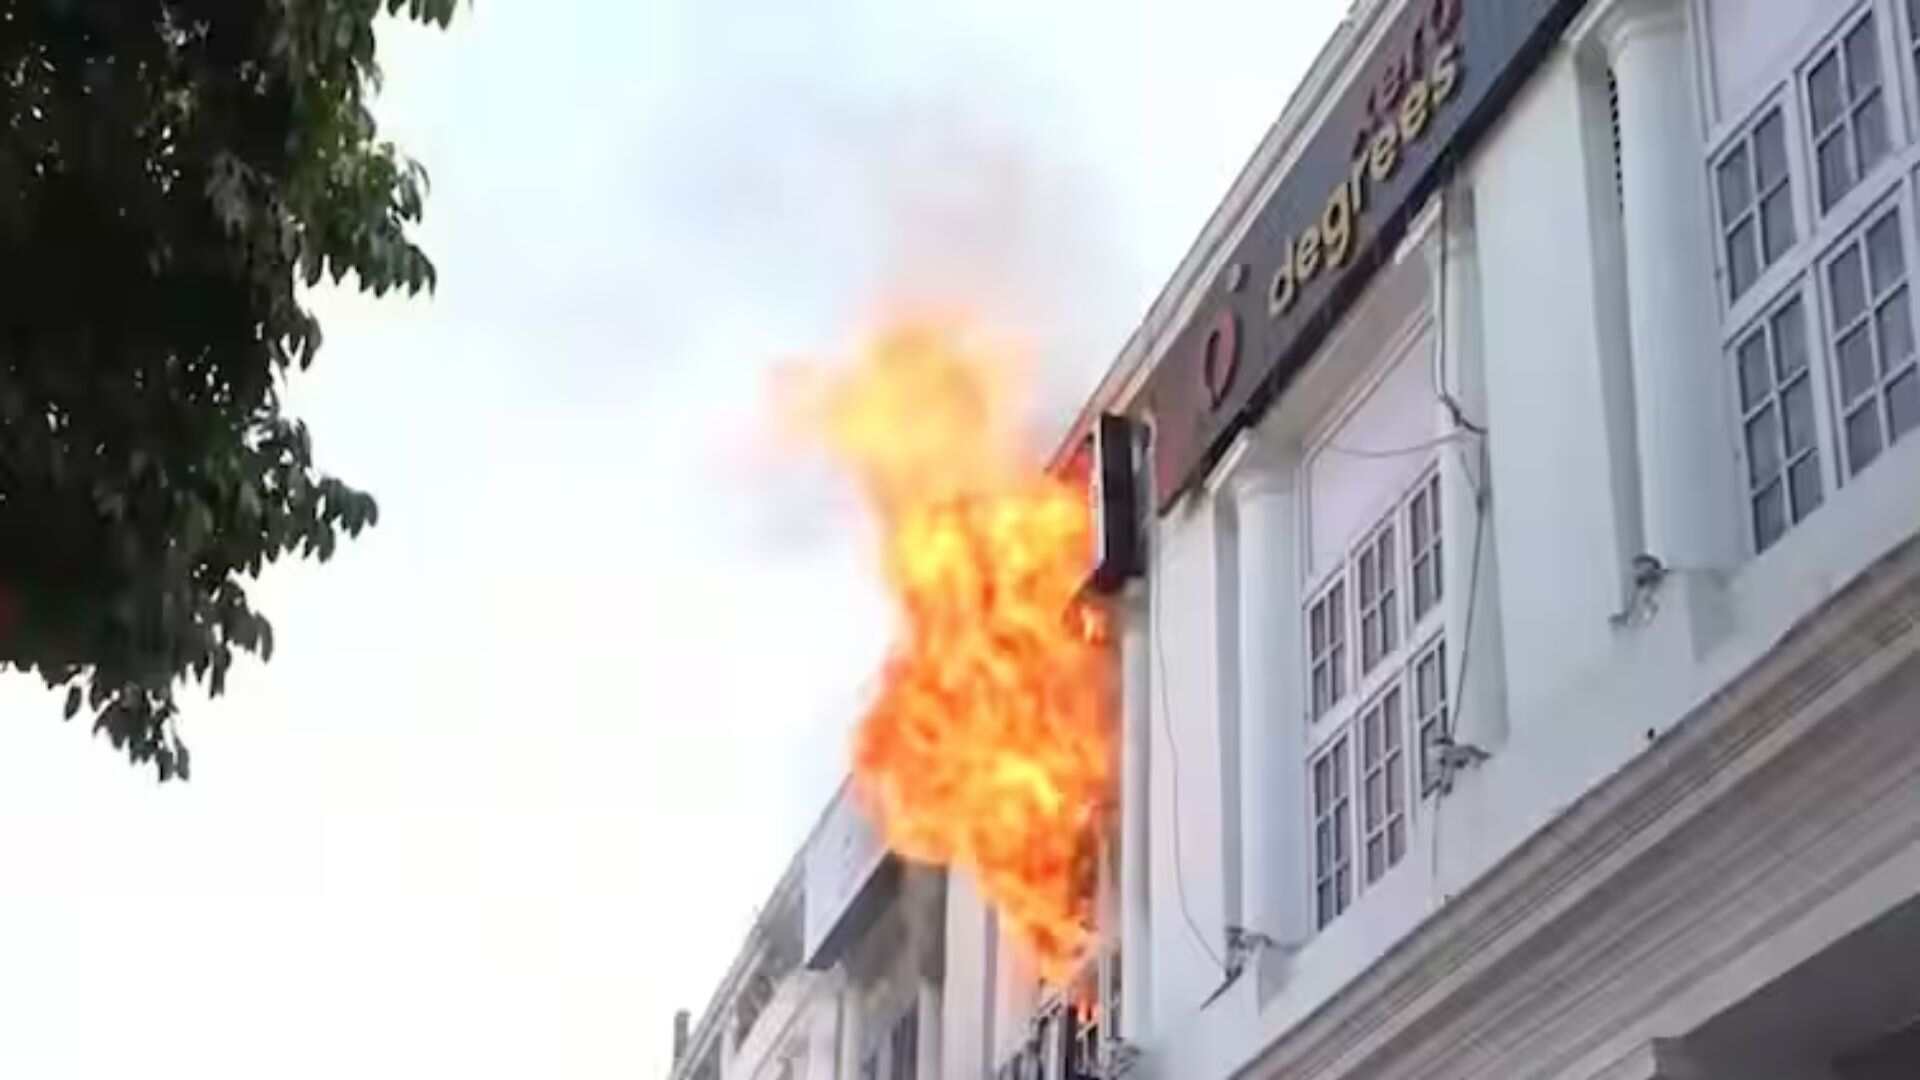 Fire Breaks Out In Mystery Rooms Of Delhi's Connaught Place